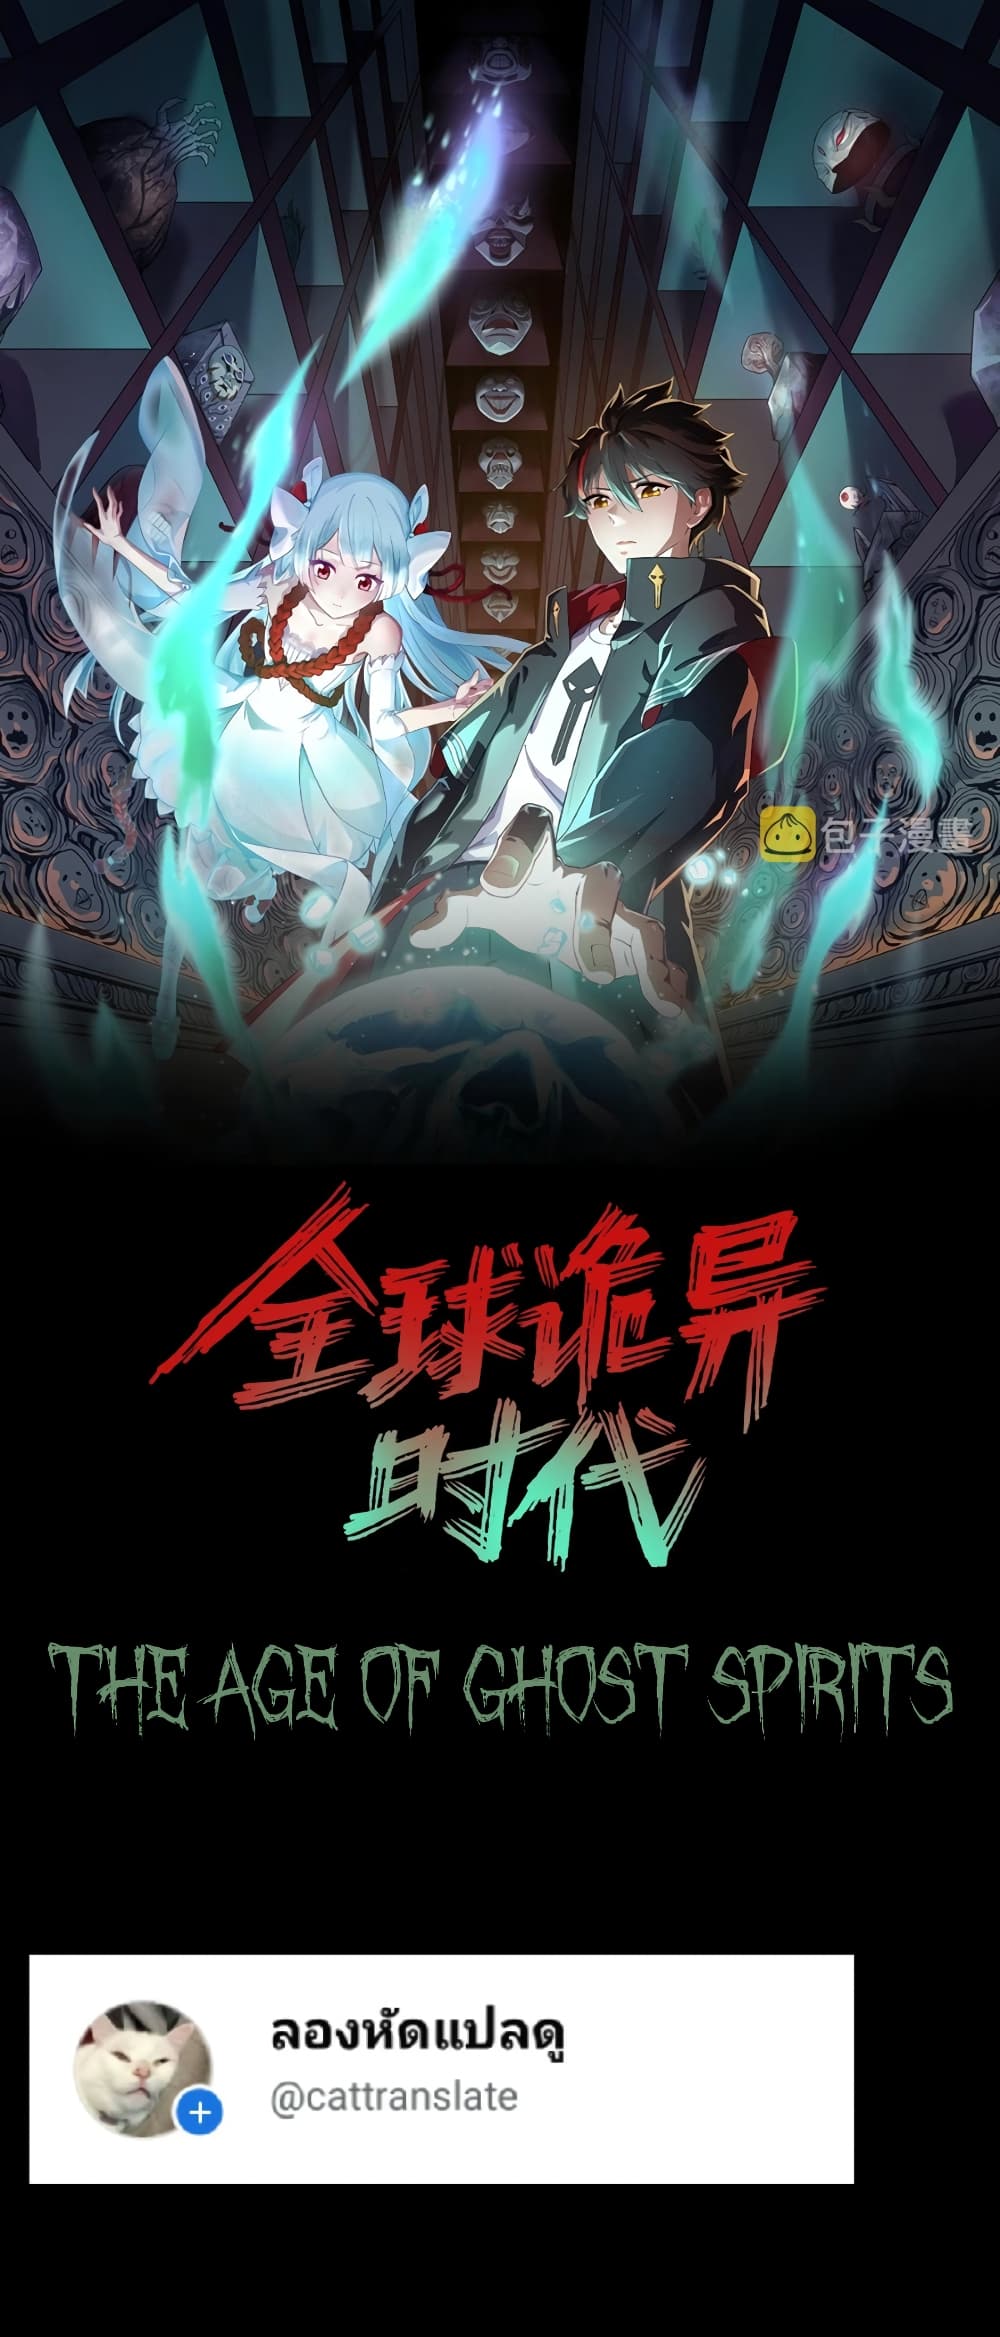 The Age of Ghost Spirits à¸à¸­à¸à¸à¸µà¹ 23 (1)